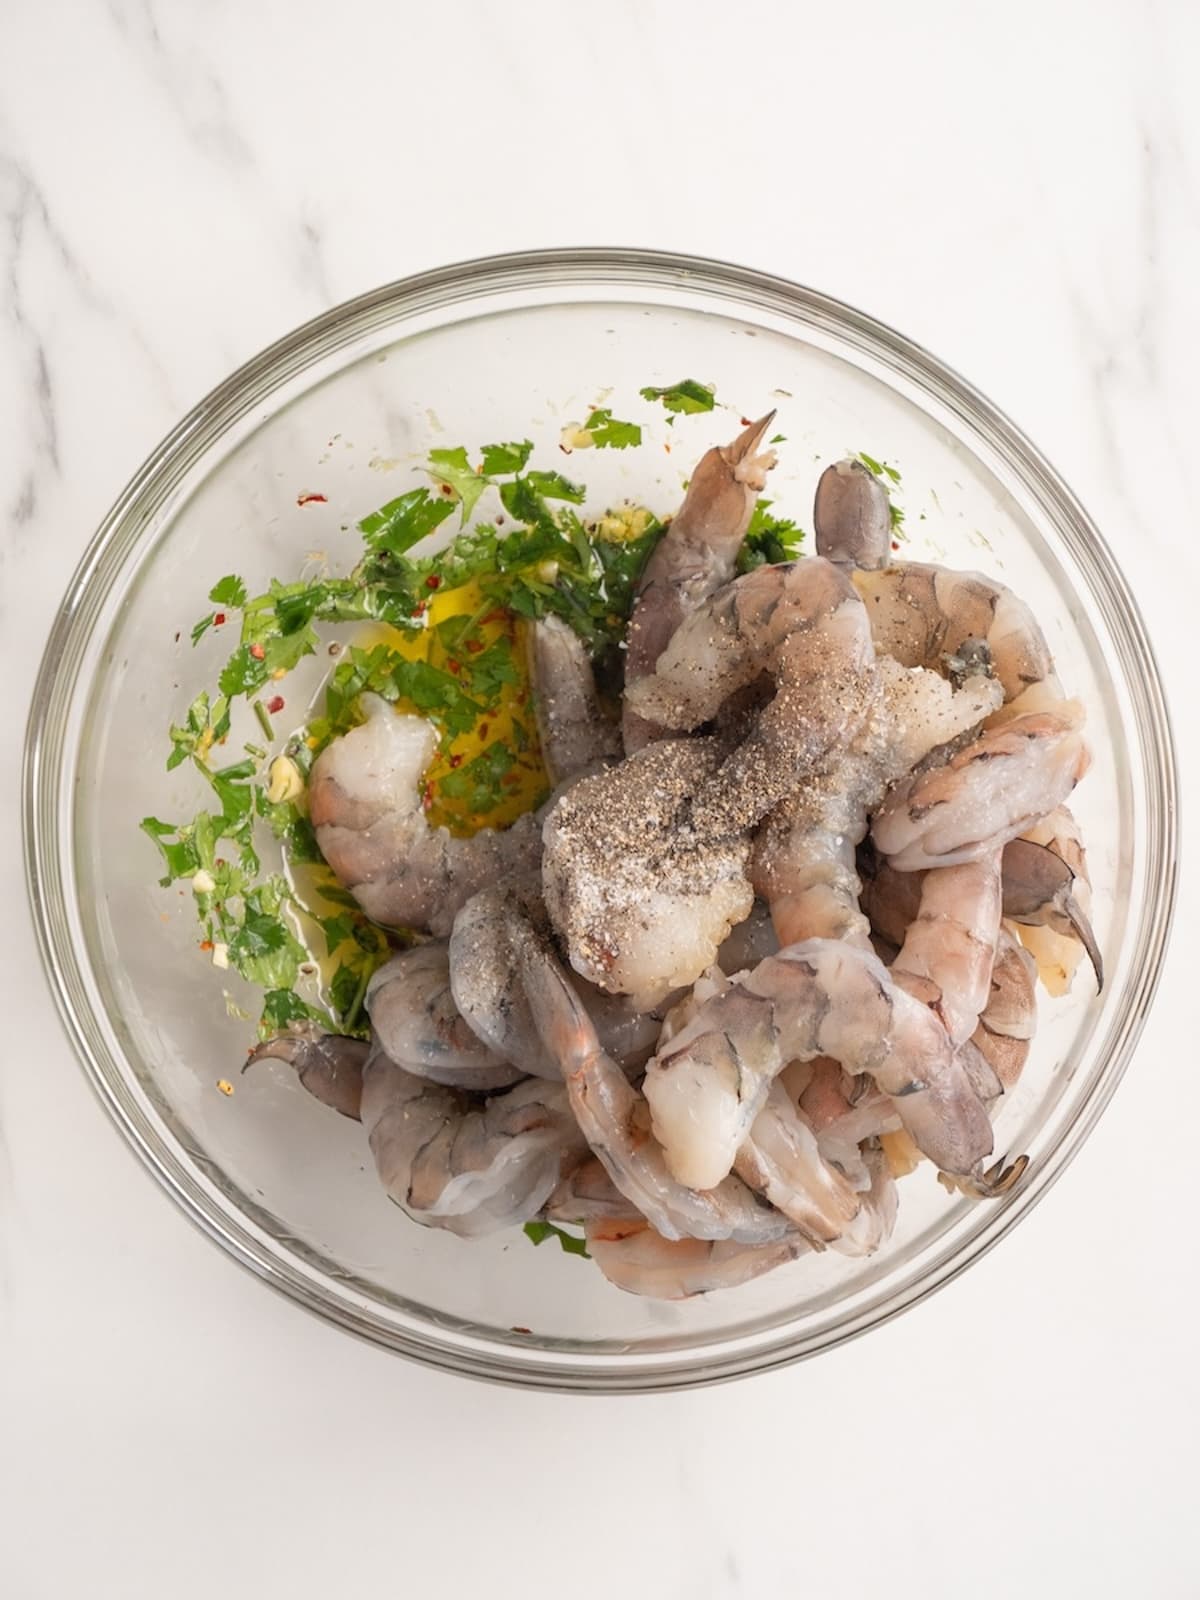 A small glass mixing bowl with an oil and herb mixture, and raw deveined peeled shrimp tossed in it and coated.